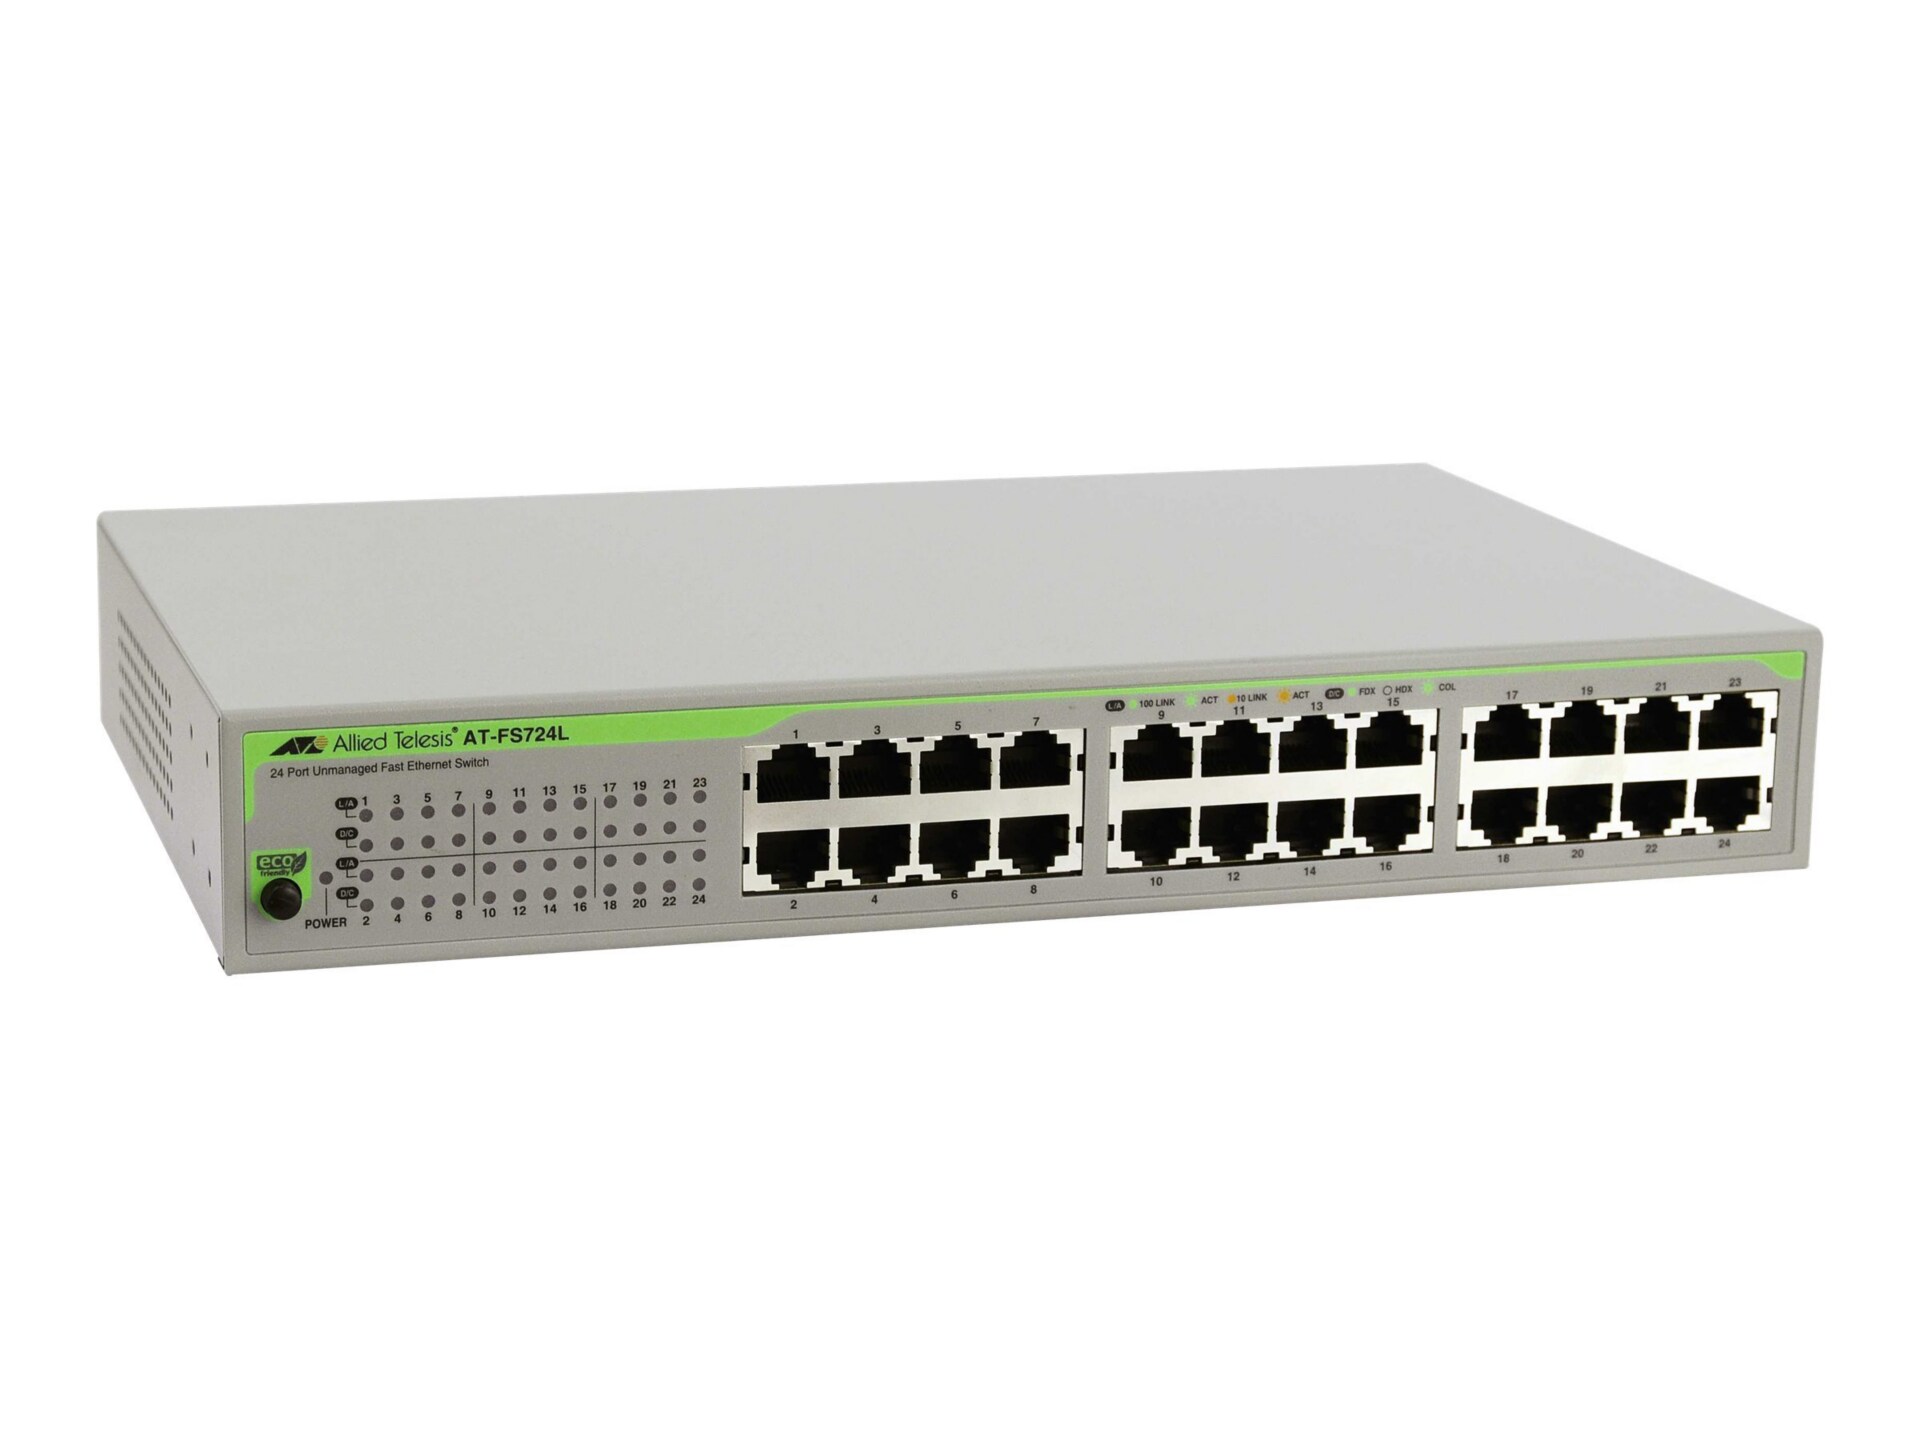 Allied Telesis AT FS724L 24-port 10/100TX Unmanaged Switch
